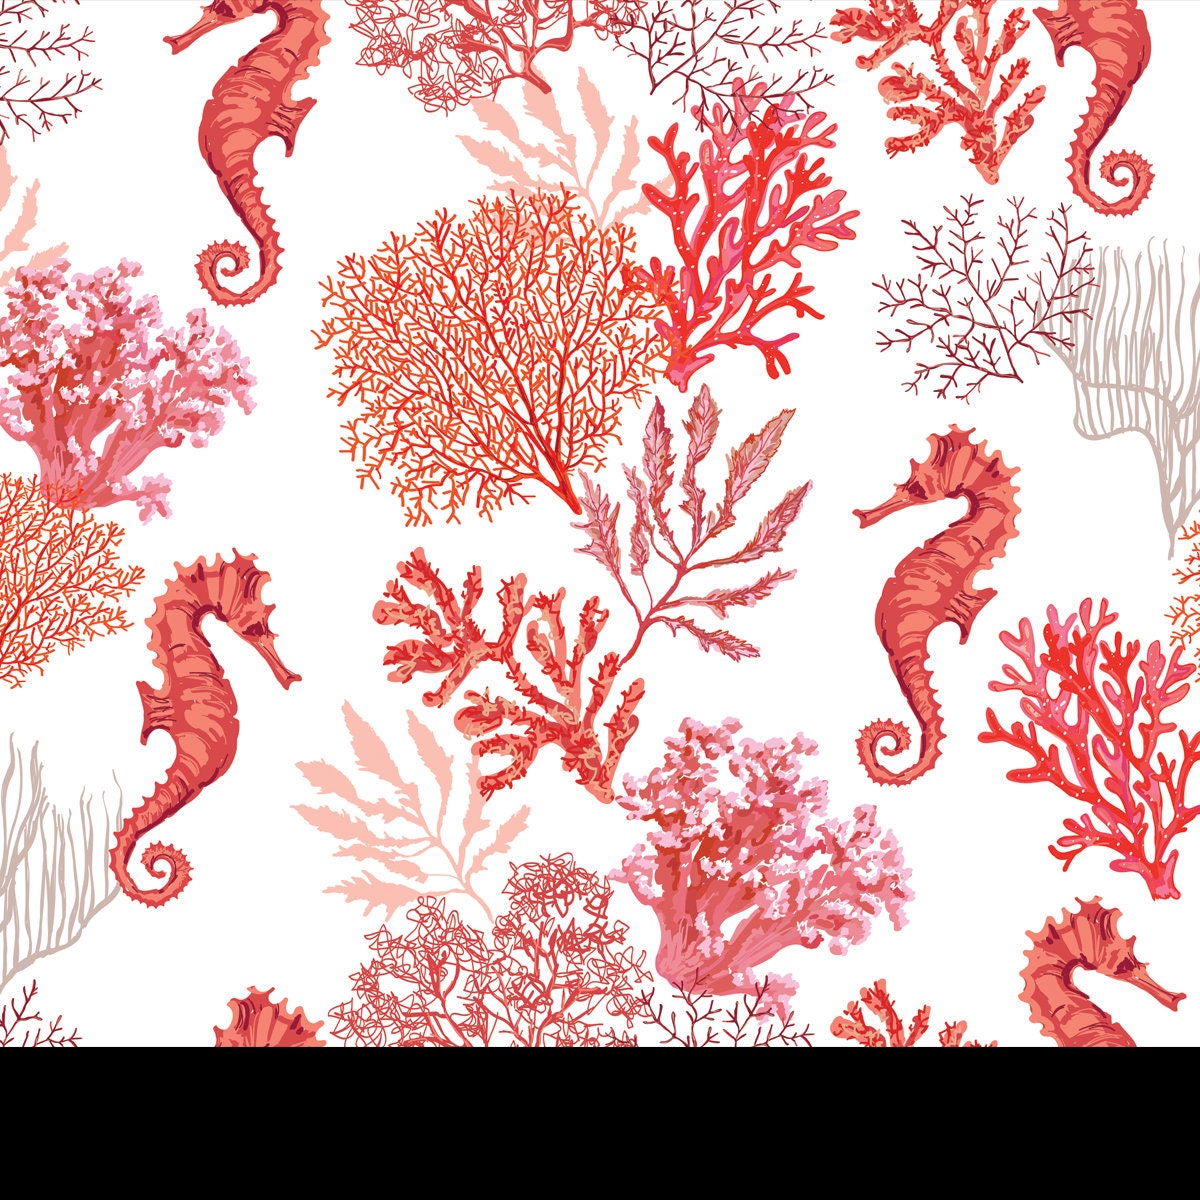 Beautiful Hand Drawn Botanical Vector Seamless Pattern Illustration with Tropical Corals Sea Horse Wallpaper Bathroom Mural